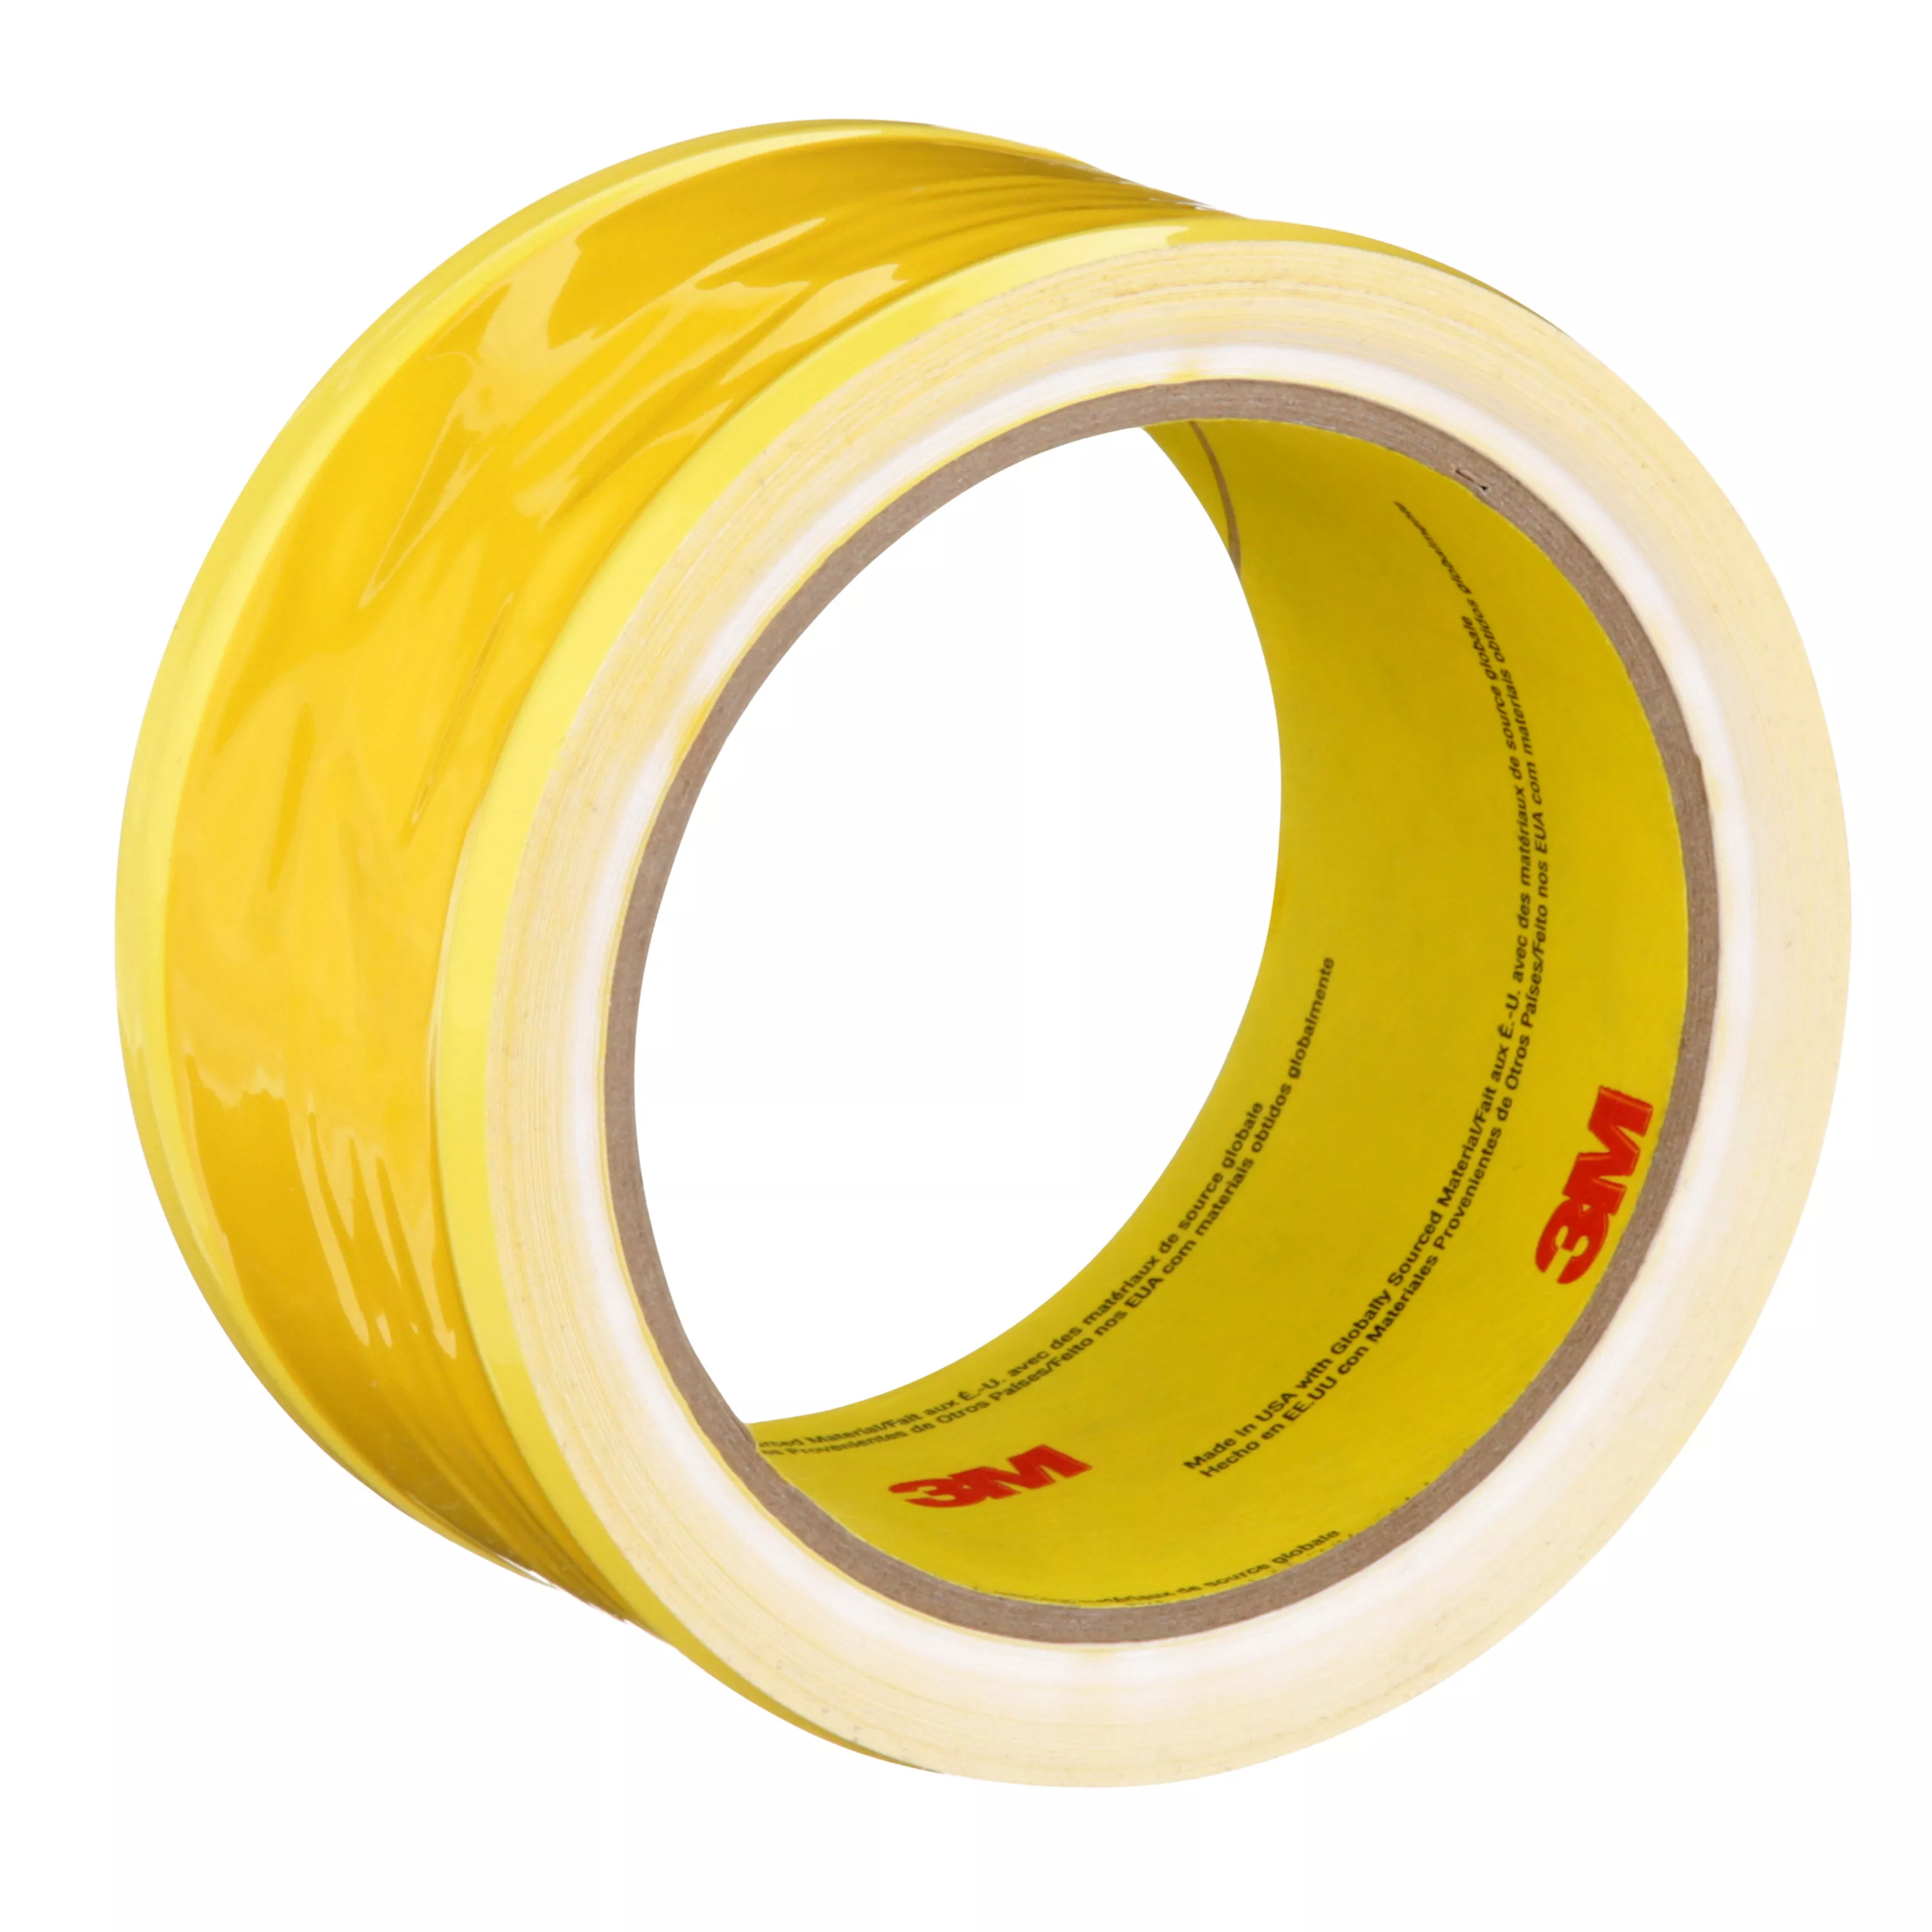 3M™ Riveters Tape 695, Yellow with White Adhesive, 2 in x 36 yd, 3 mil,
24 Roll/Case